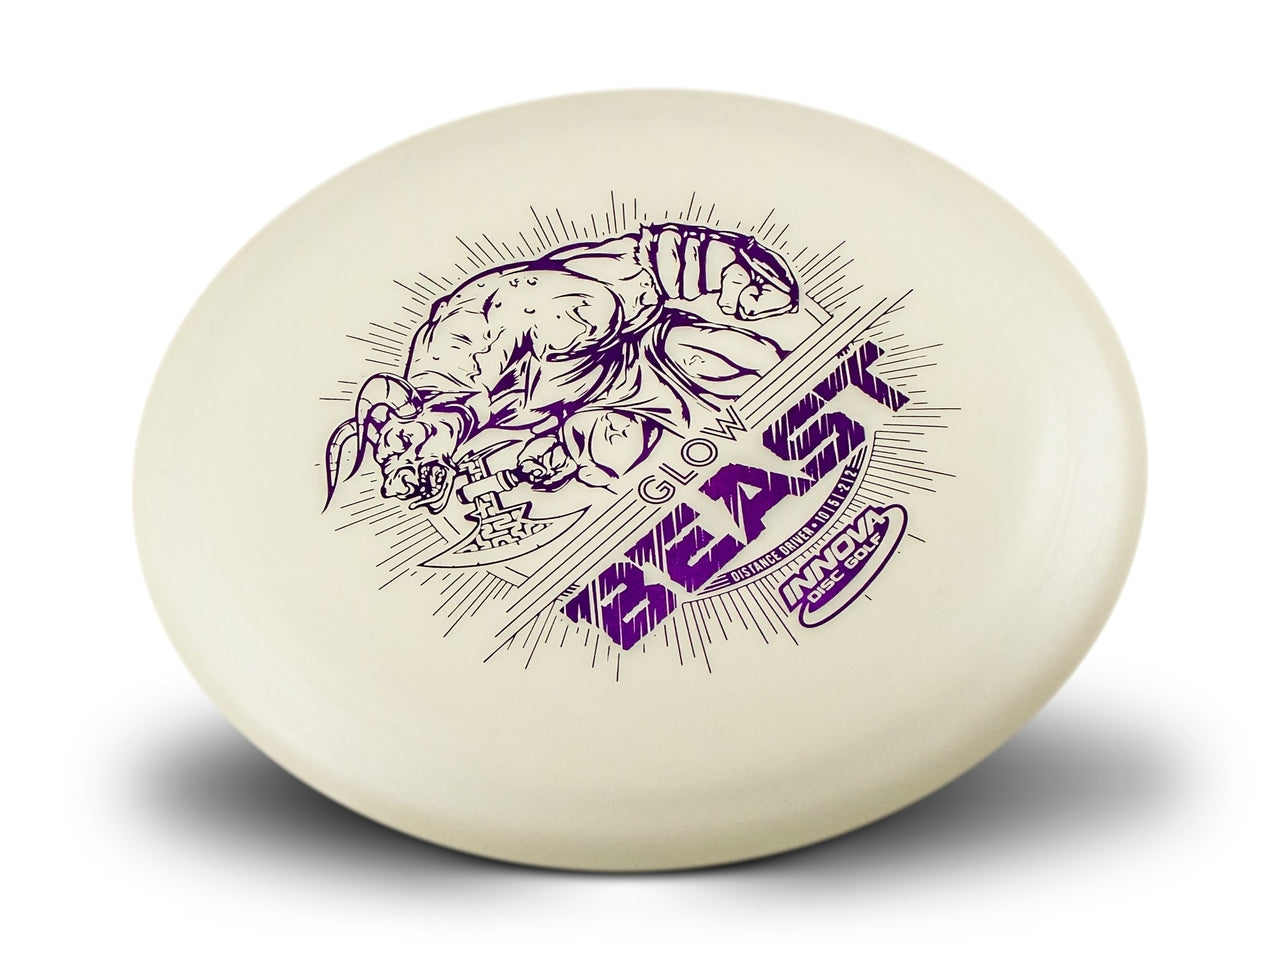 Innova DX Glow Beast Distance Driver with Minotaur with Battle Axe Stamp - Speed 10